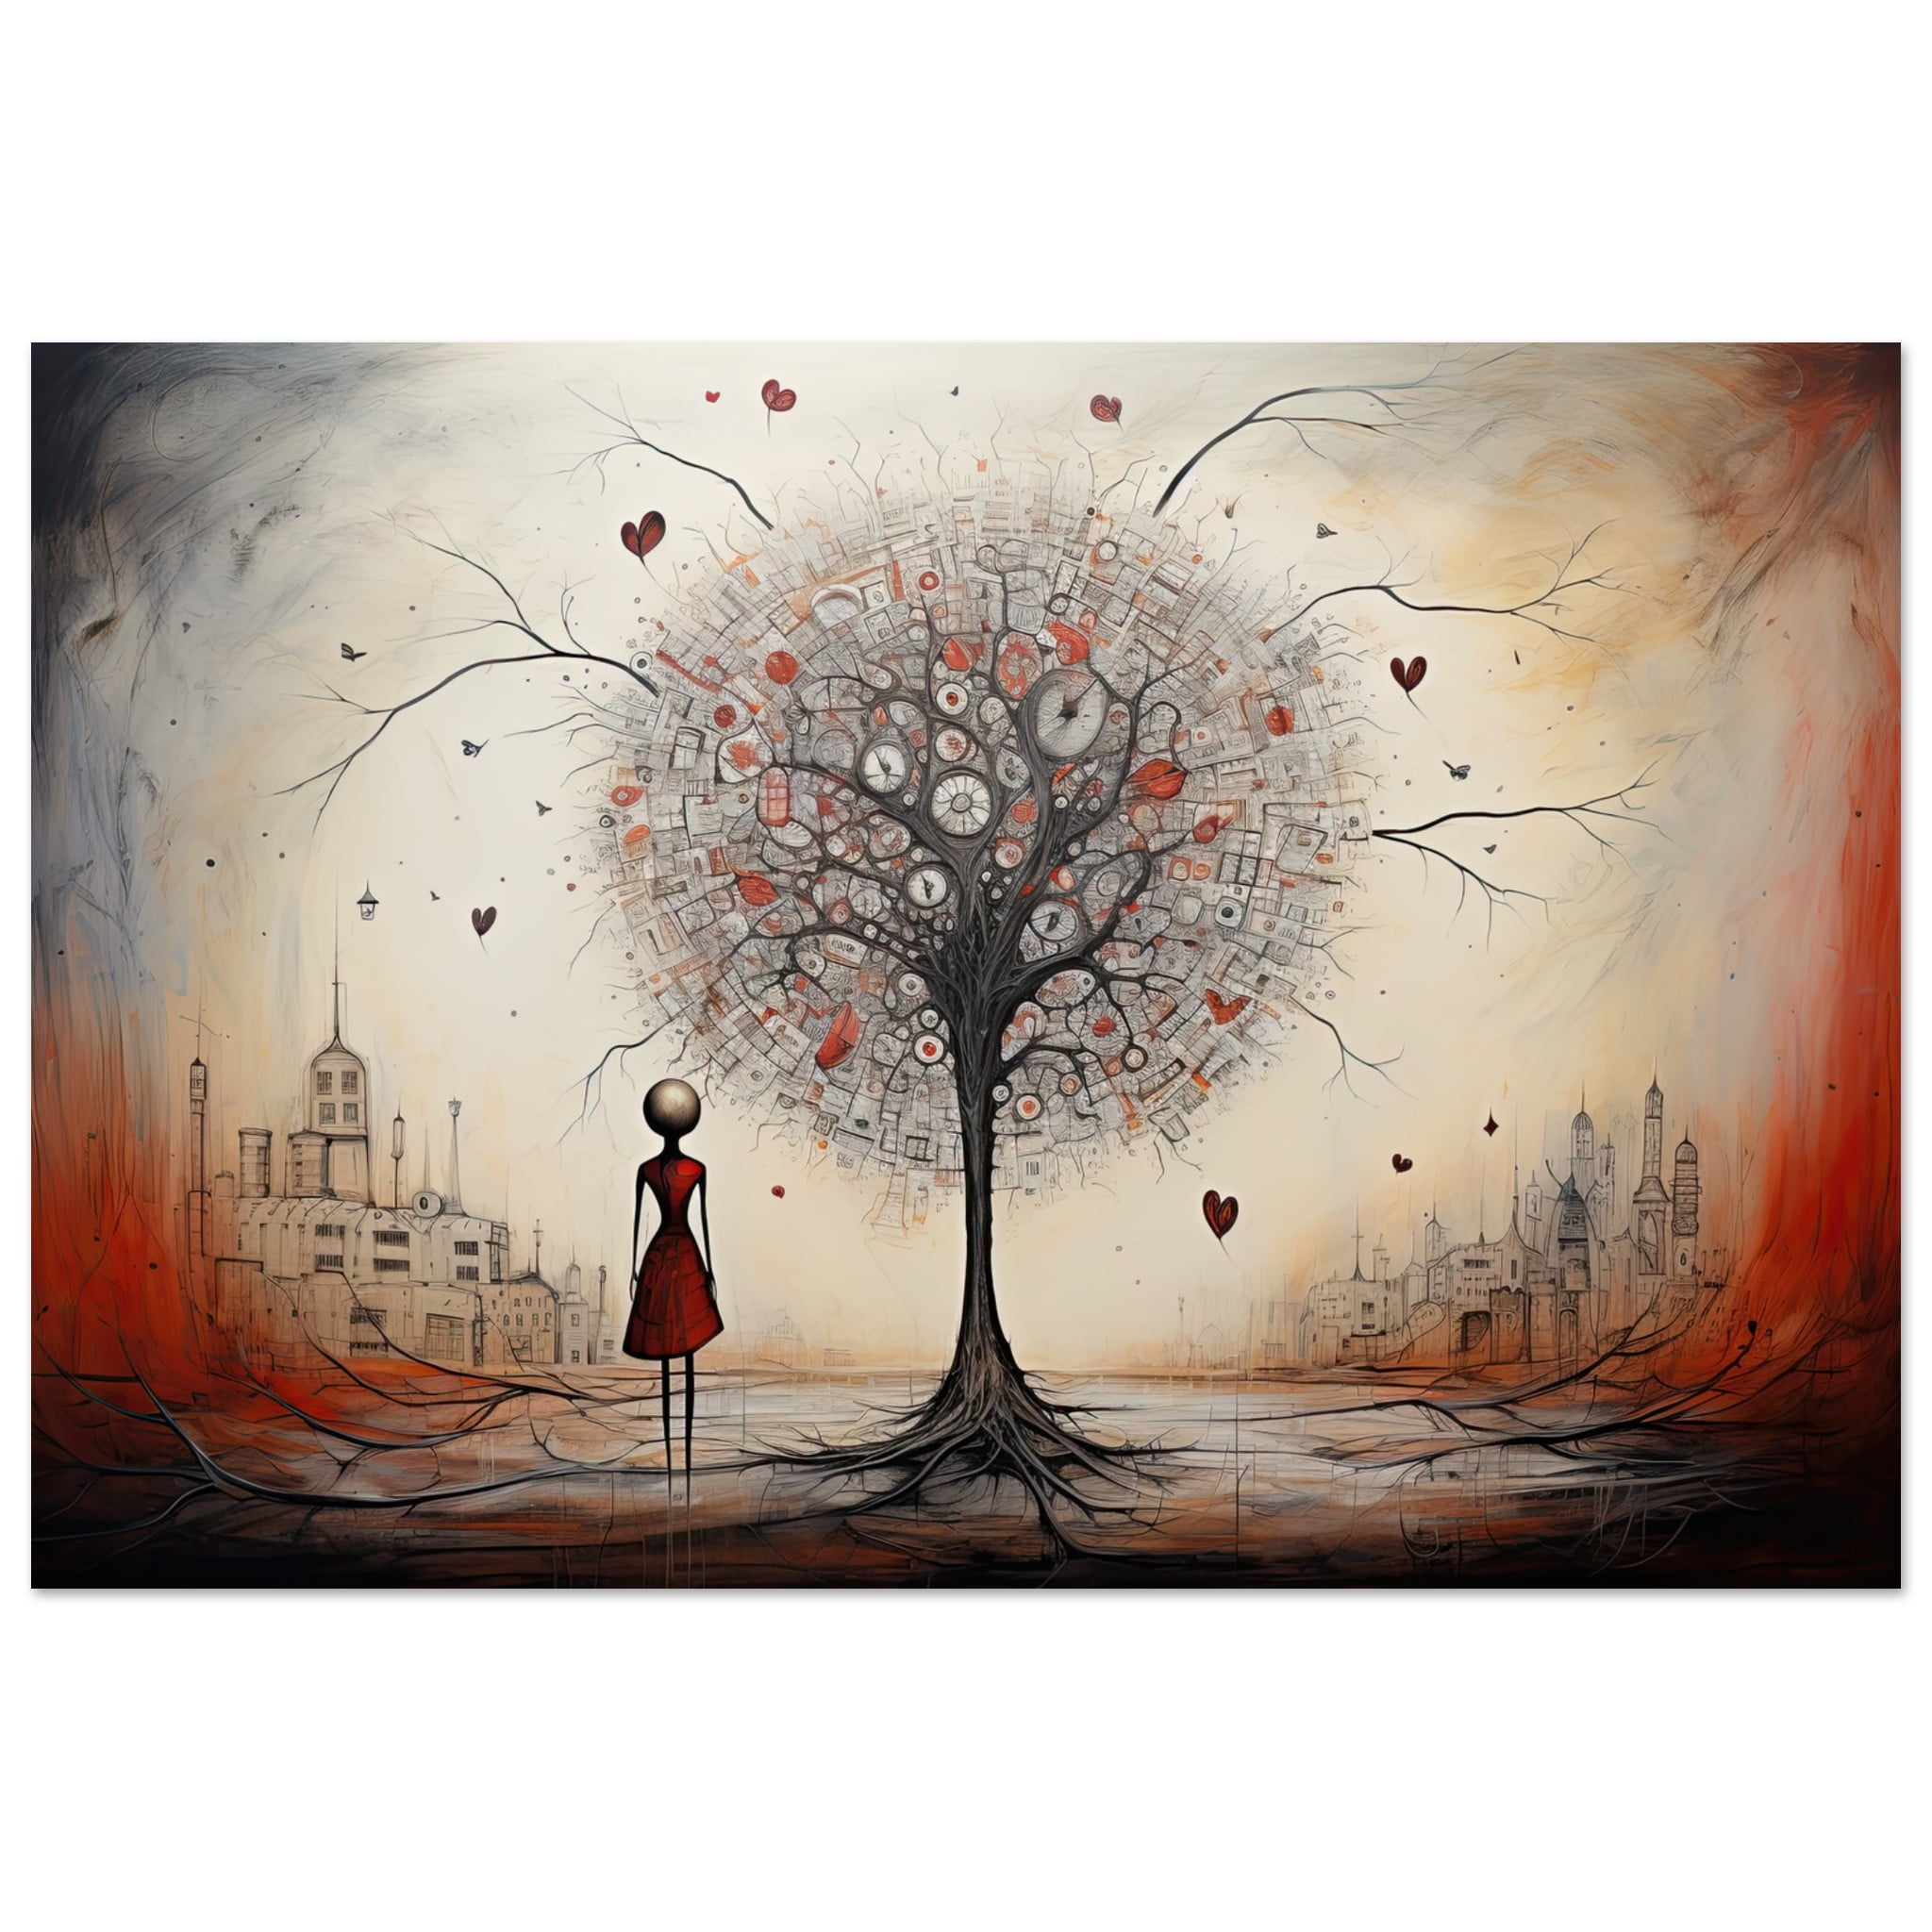 Heart Tree of Desire – Abstract Art Poster